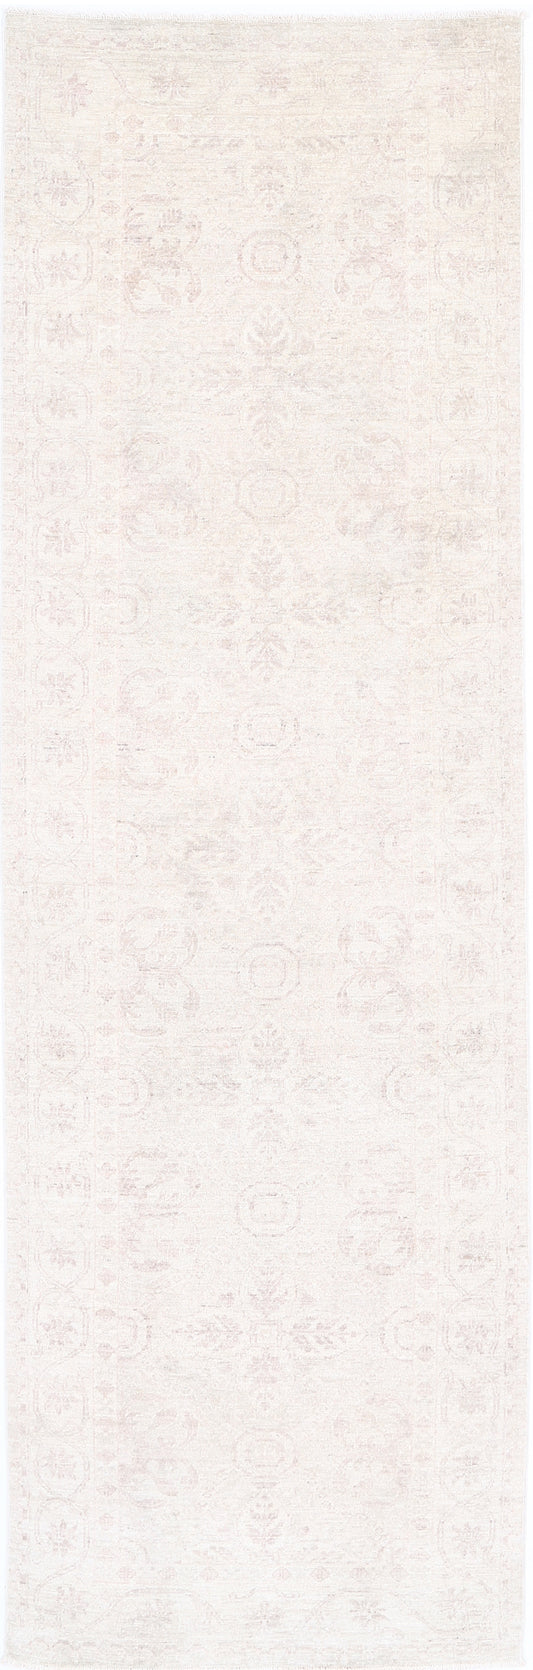 Traditional Hand Knotted Serenity Tabriz Wool Rug of Size 3'0'' X 10'0'' in Ivory and Grey Colors - Made in Afghanistan